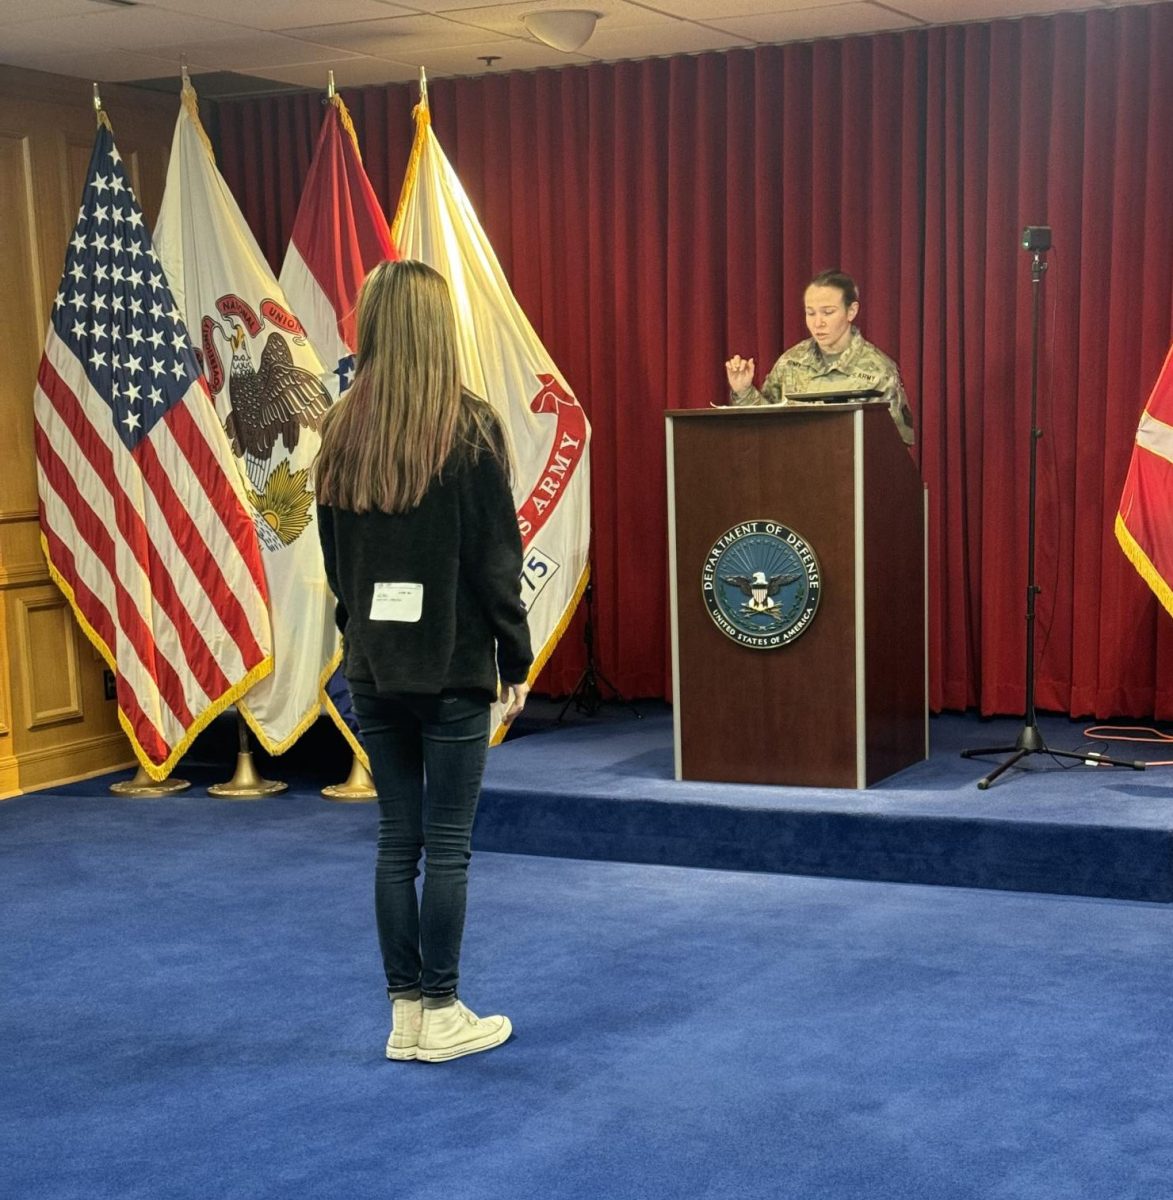 A Senior’s Service: Cheyenne Wilson Commits to the National Guard